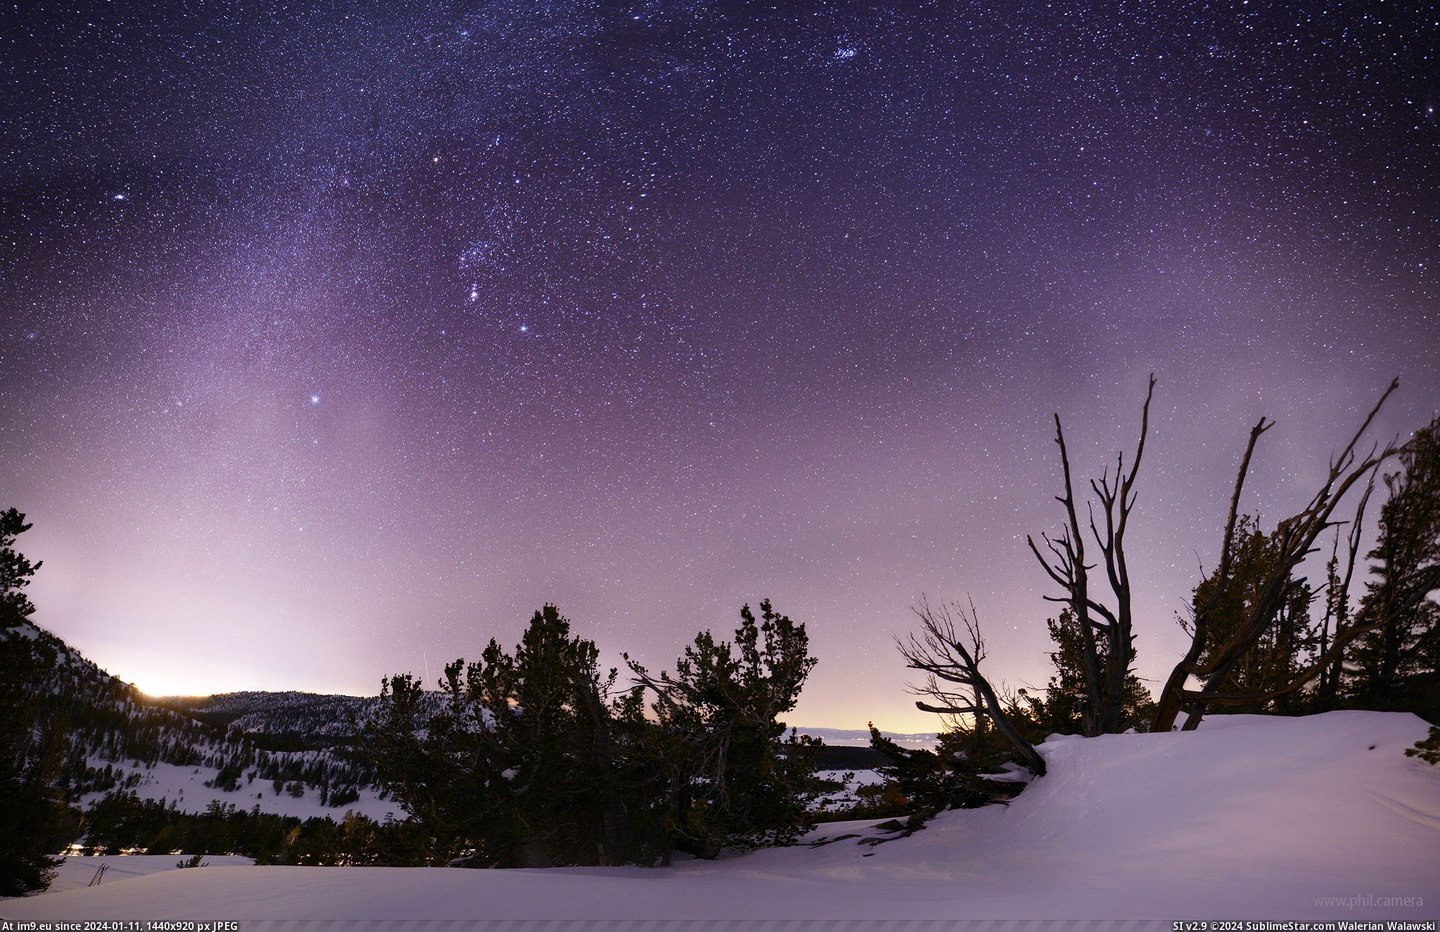 #Nature #Photo #Wallpaper #Night #Lake #Left #Winter #Rose #Sky #Stars [Earthporn] Winter Night Sky over The Mt Rose - Sheep Flat meadow last night, with Carson down to the left and Lake Tahoe peakin Pic. (Obraz z album My r/EARTHPORN favs))